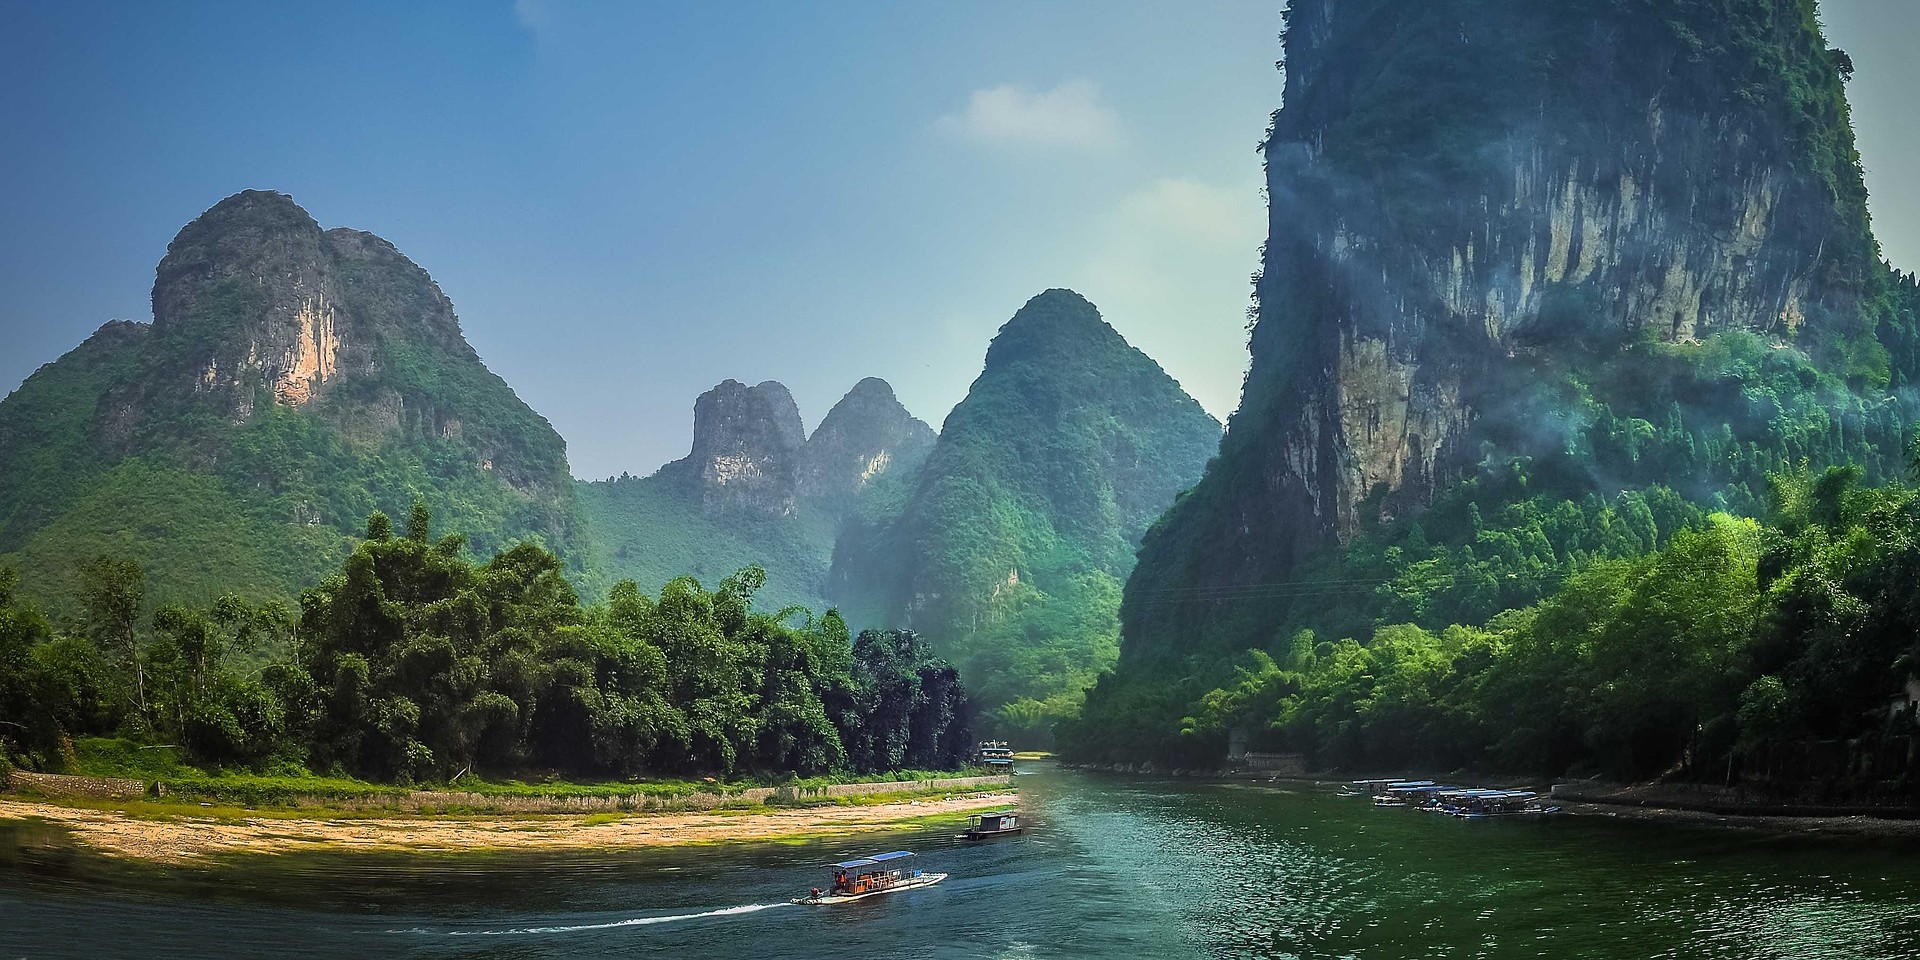 10 REASONS YOU SHOULD DROP EVERYTHING & MOVE TO CHINA IN 2020